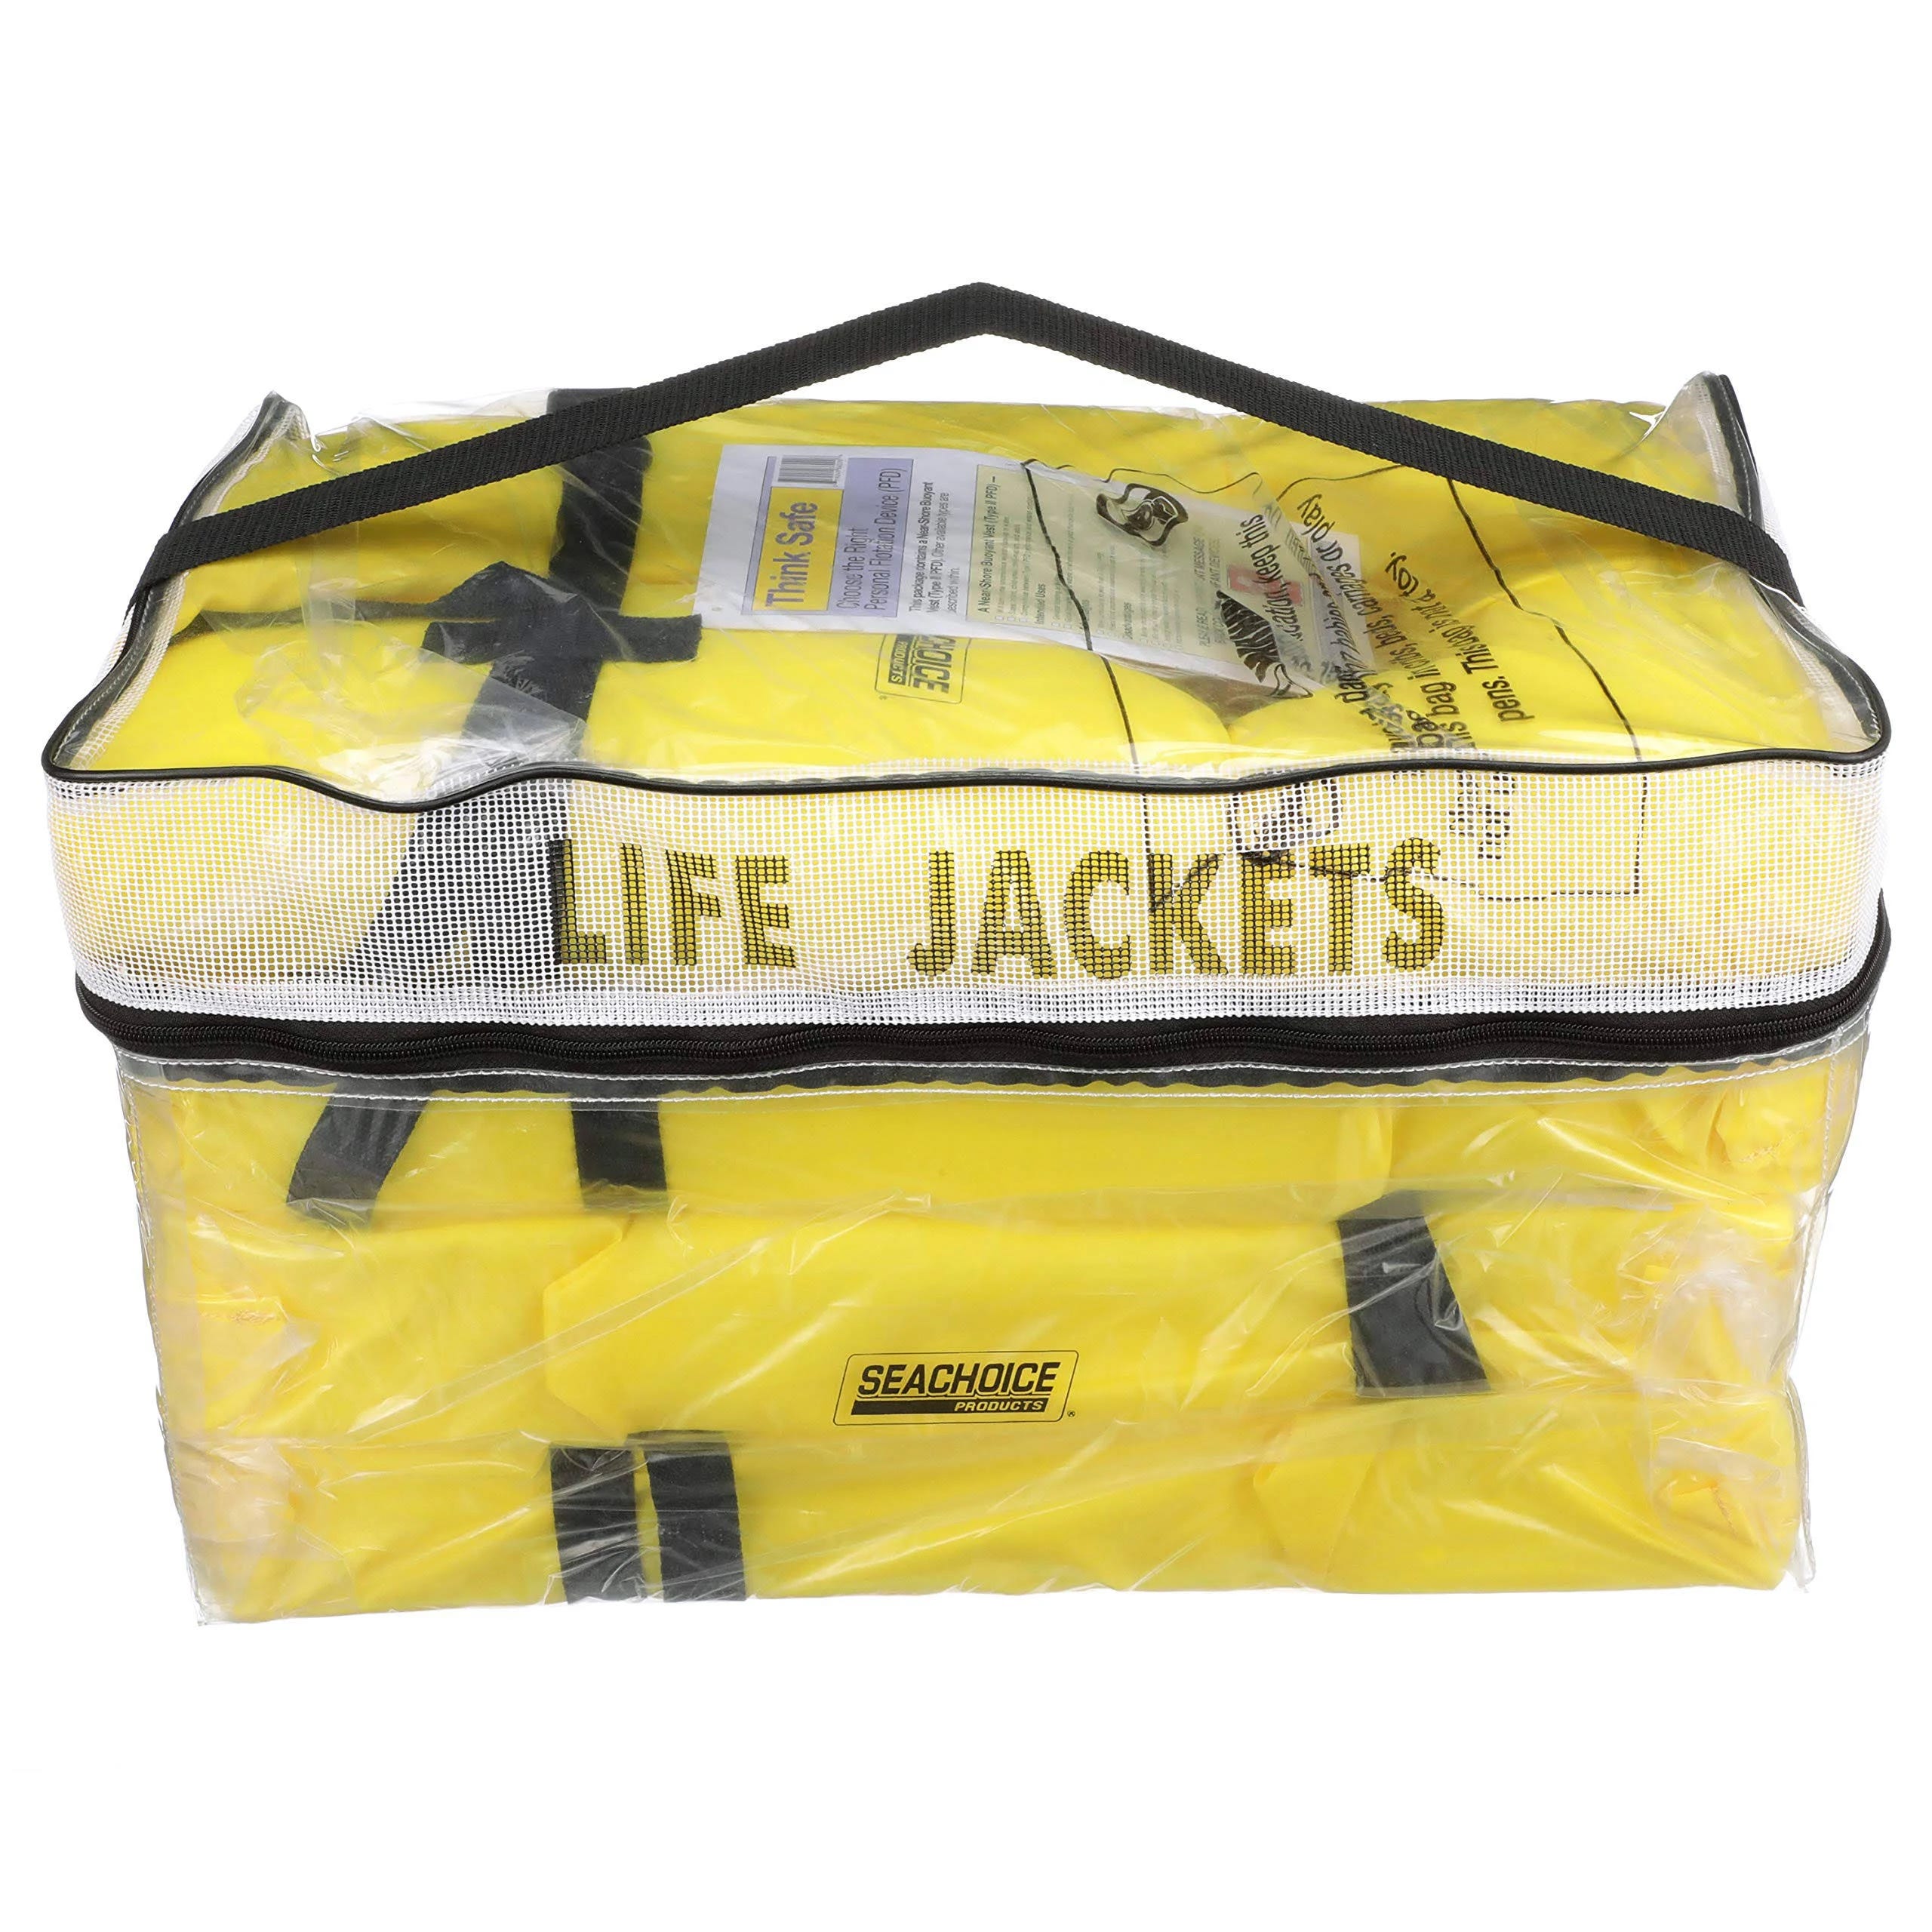 Coast Guard Approved Type II Life Vests (4-Pack with Yellow Carry Bag) | Image